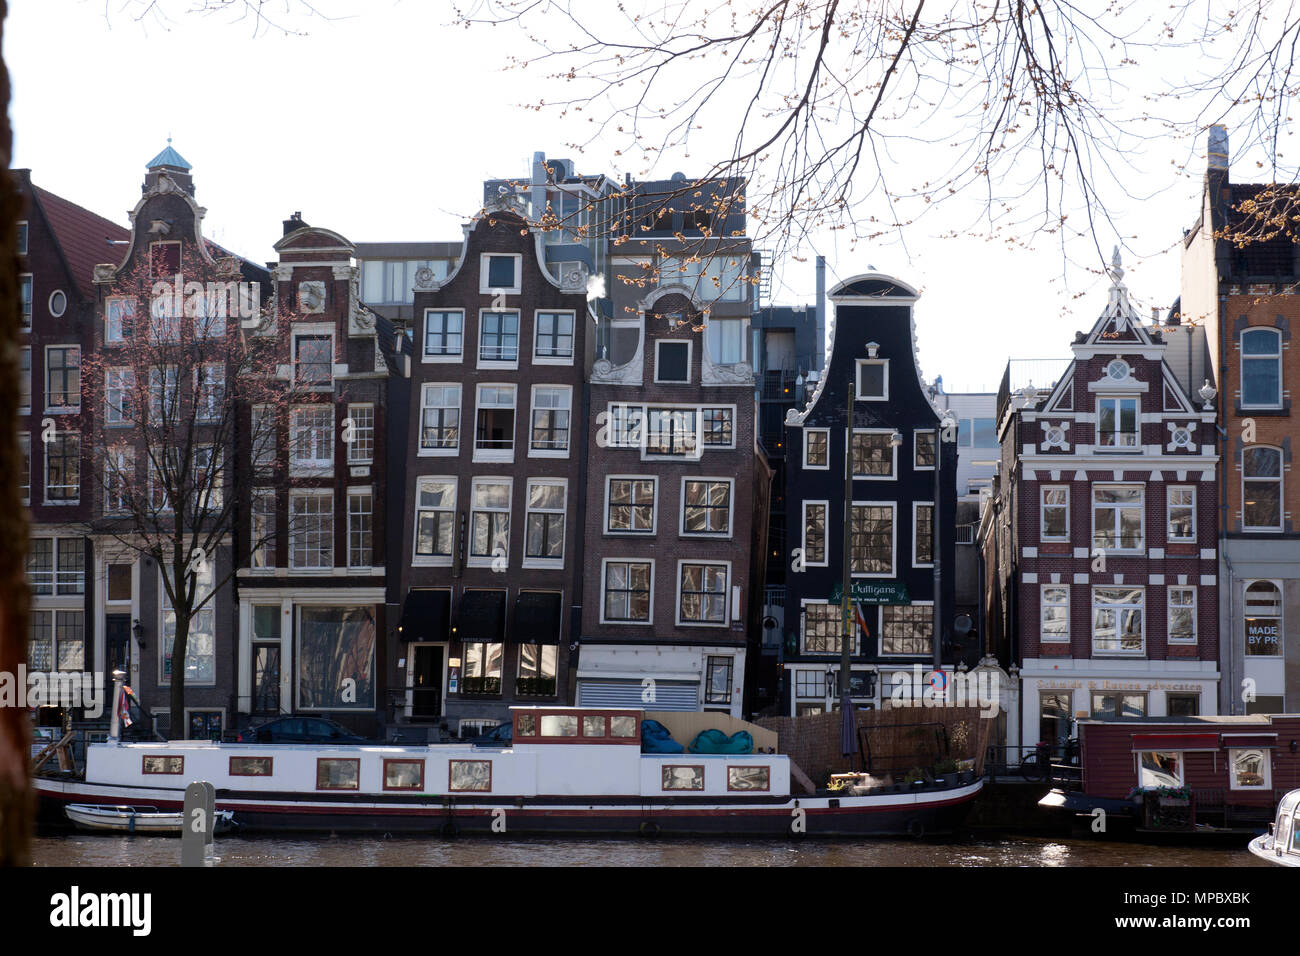 Amsterdam,The Netherlands-march 22,2015: canals houses at the river amstel l and a house boat Stock Photo